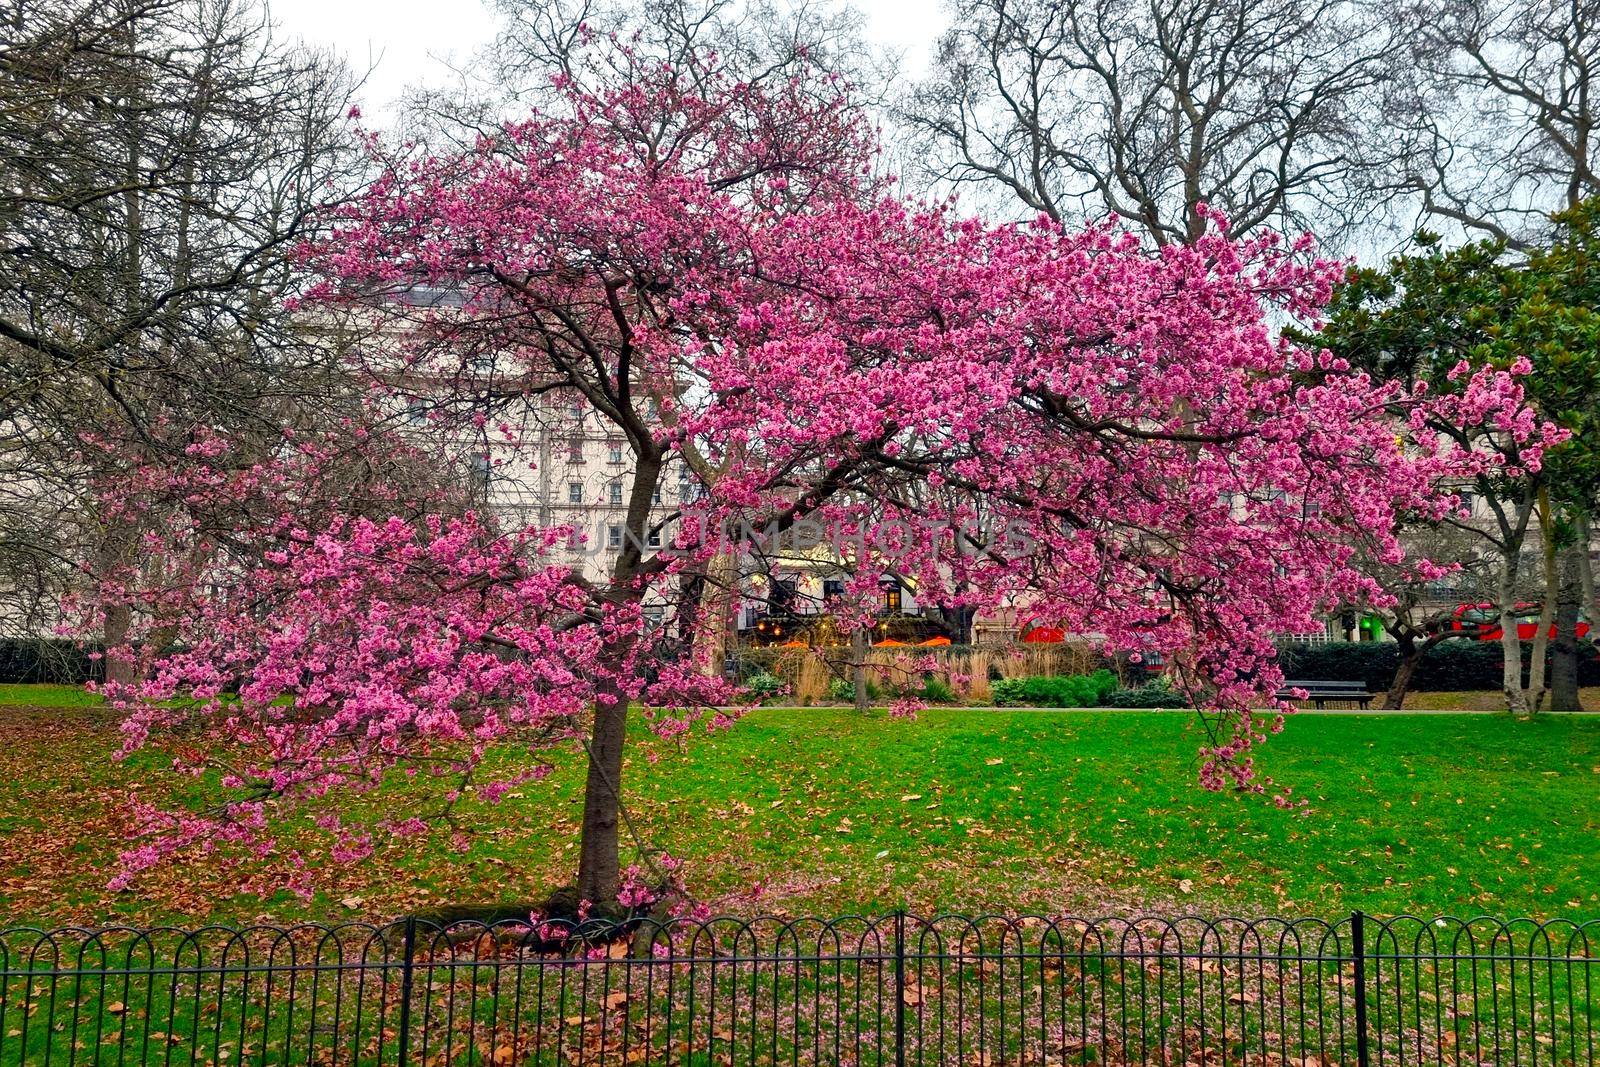 A flowering tree branch in the park in the spring on a cloudy day